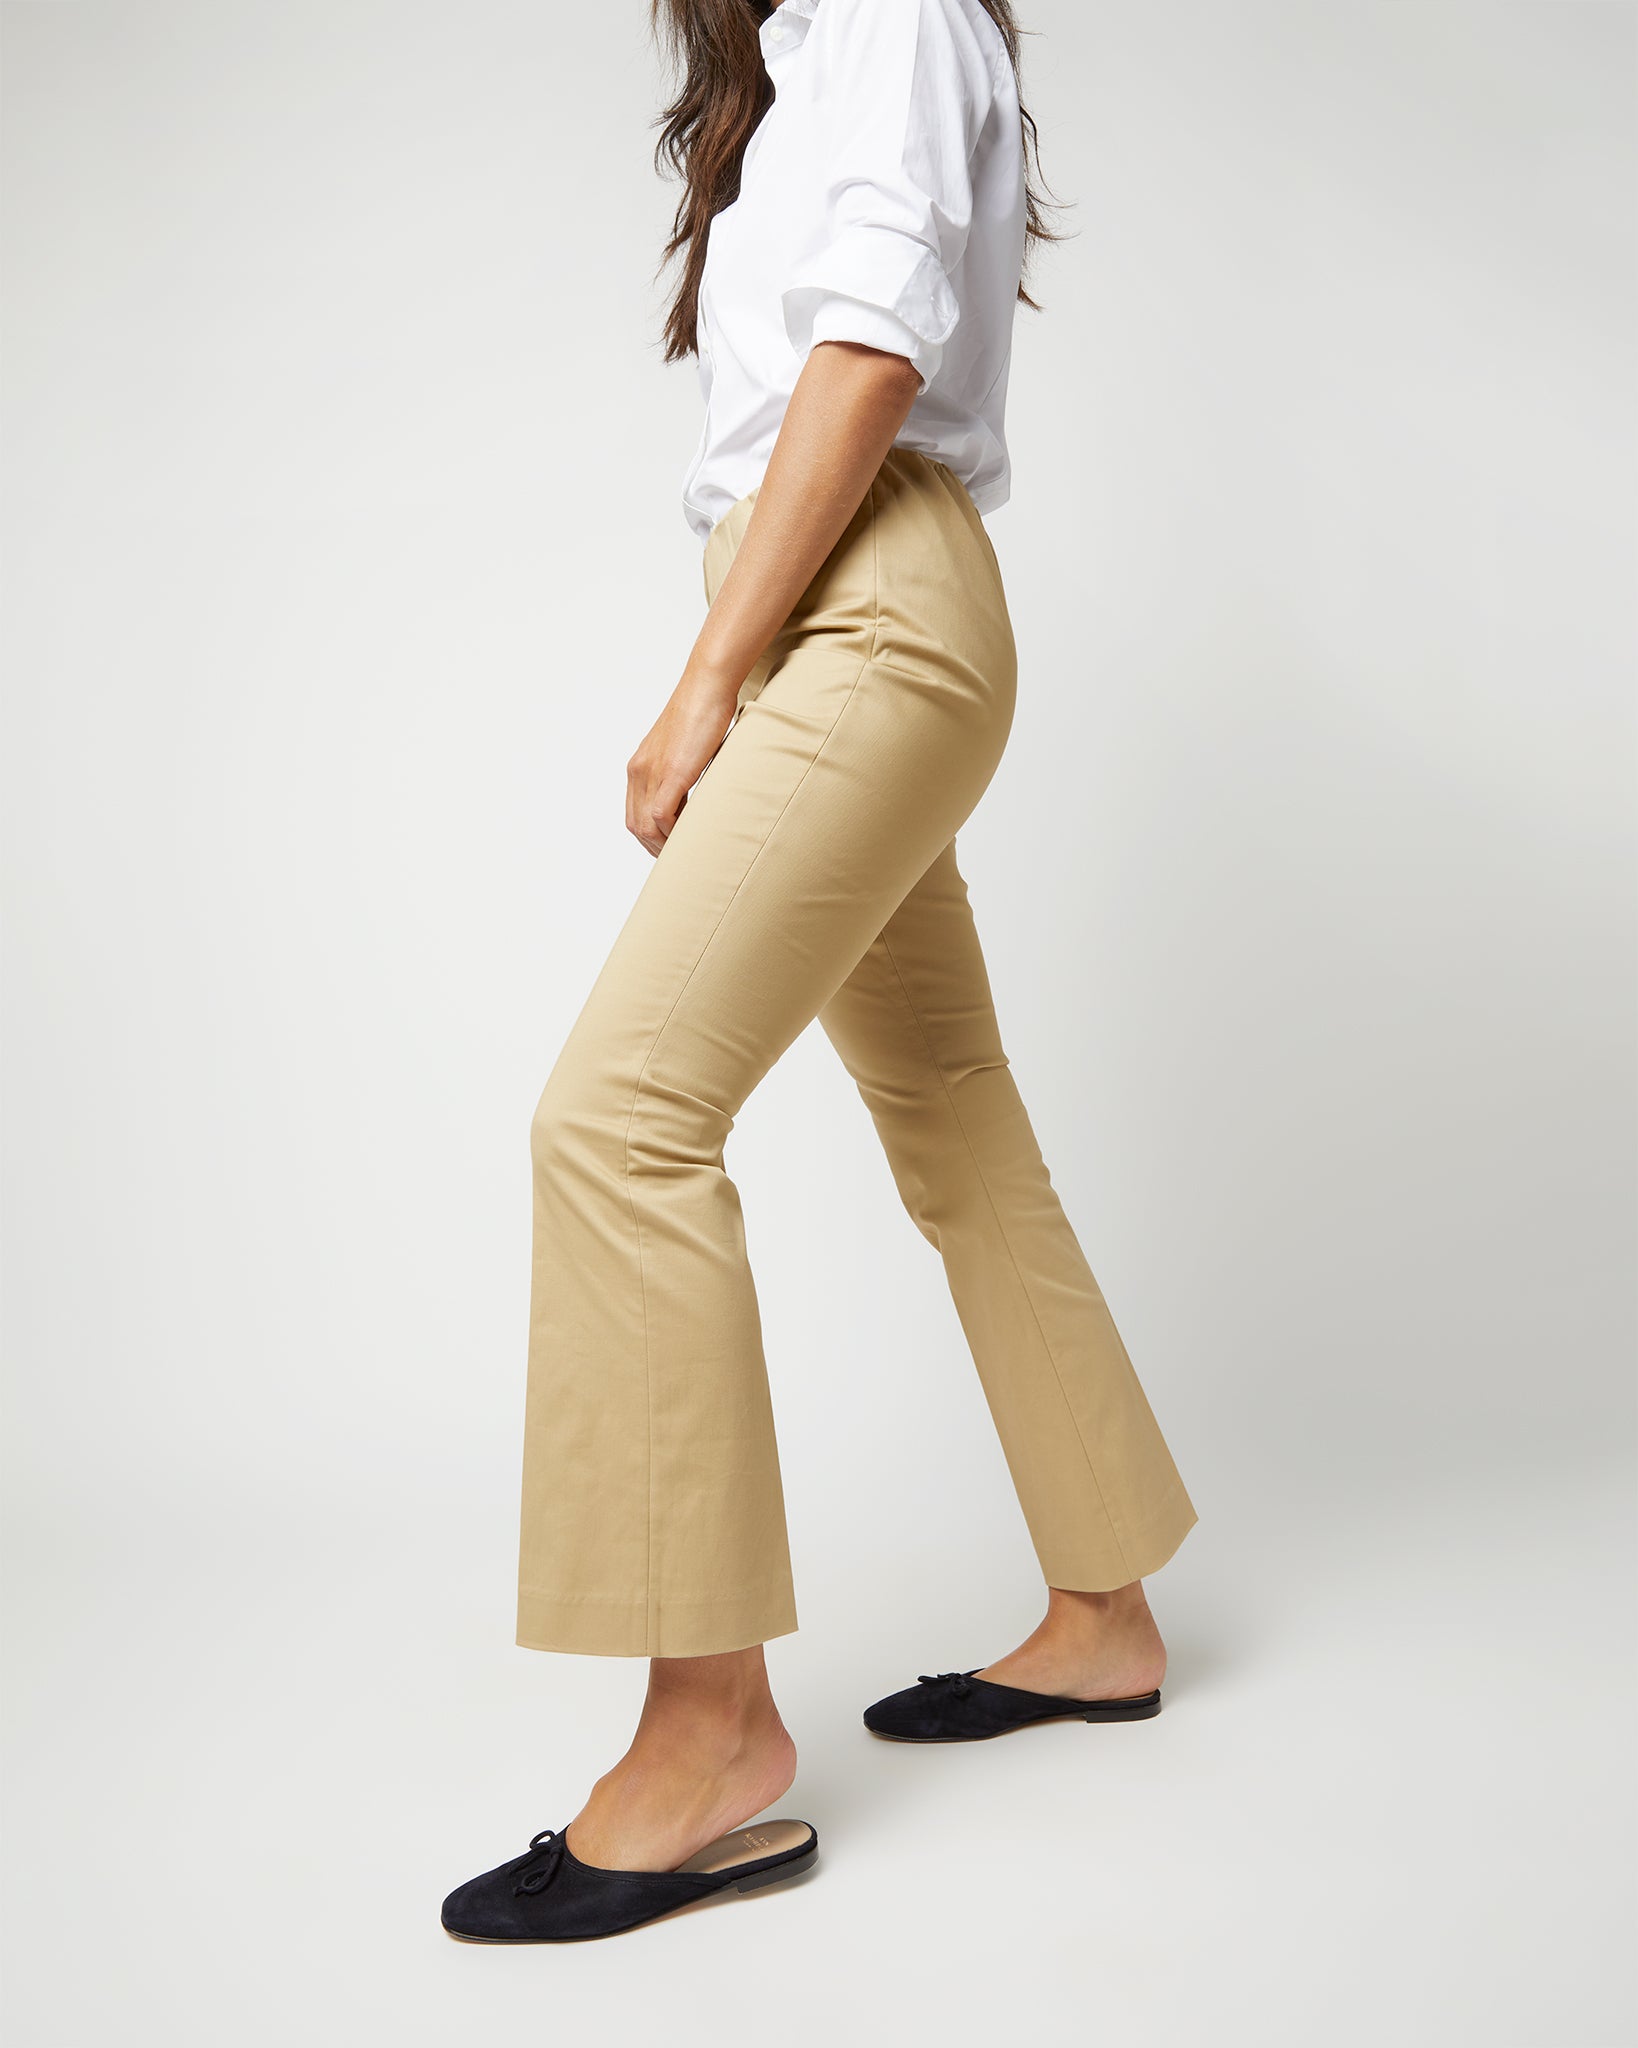 Faye Flare Cropped Pant in Khaki Stretch Sateen